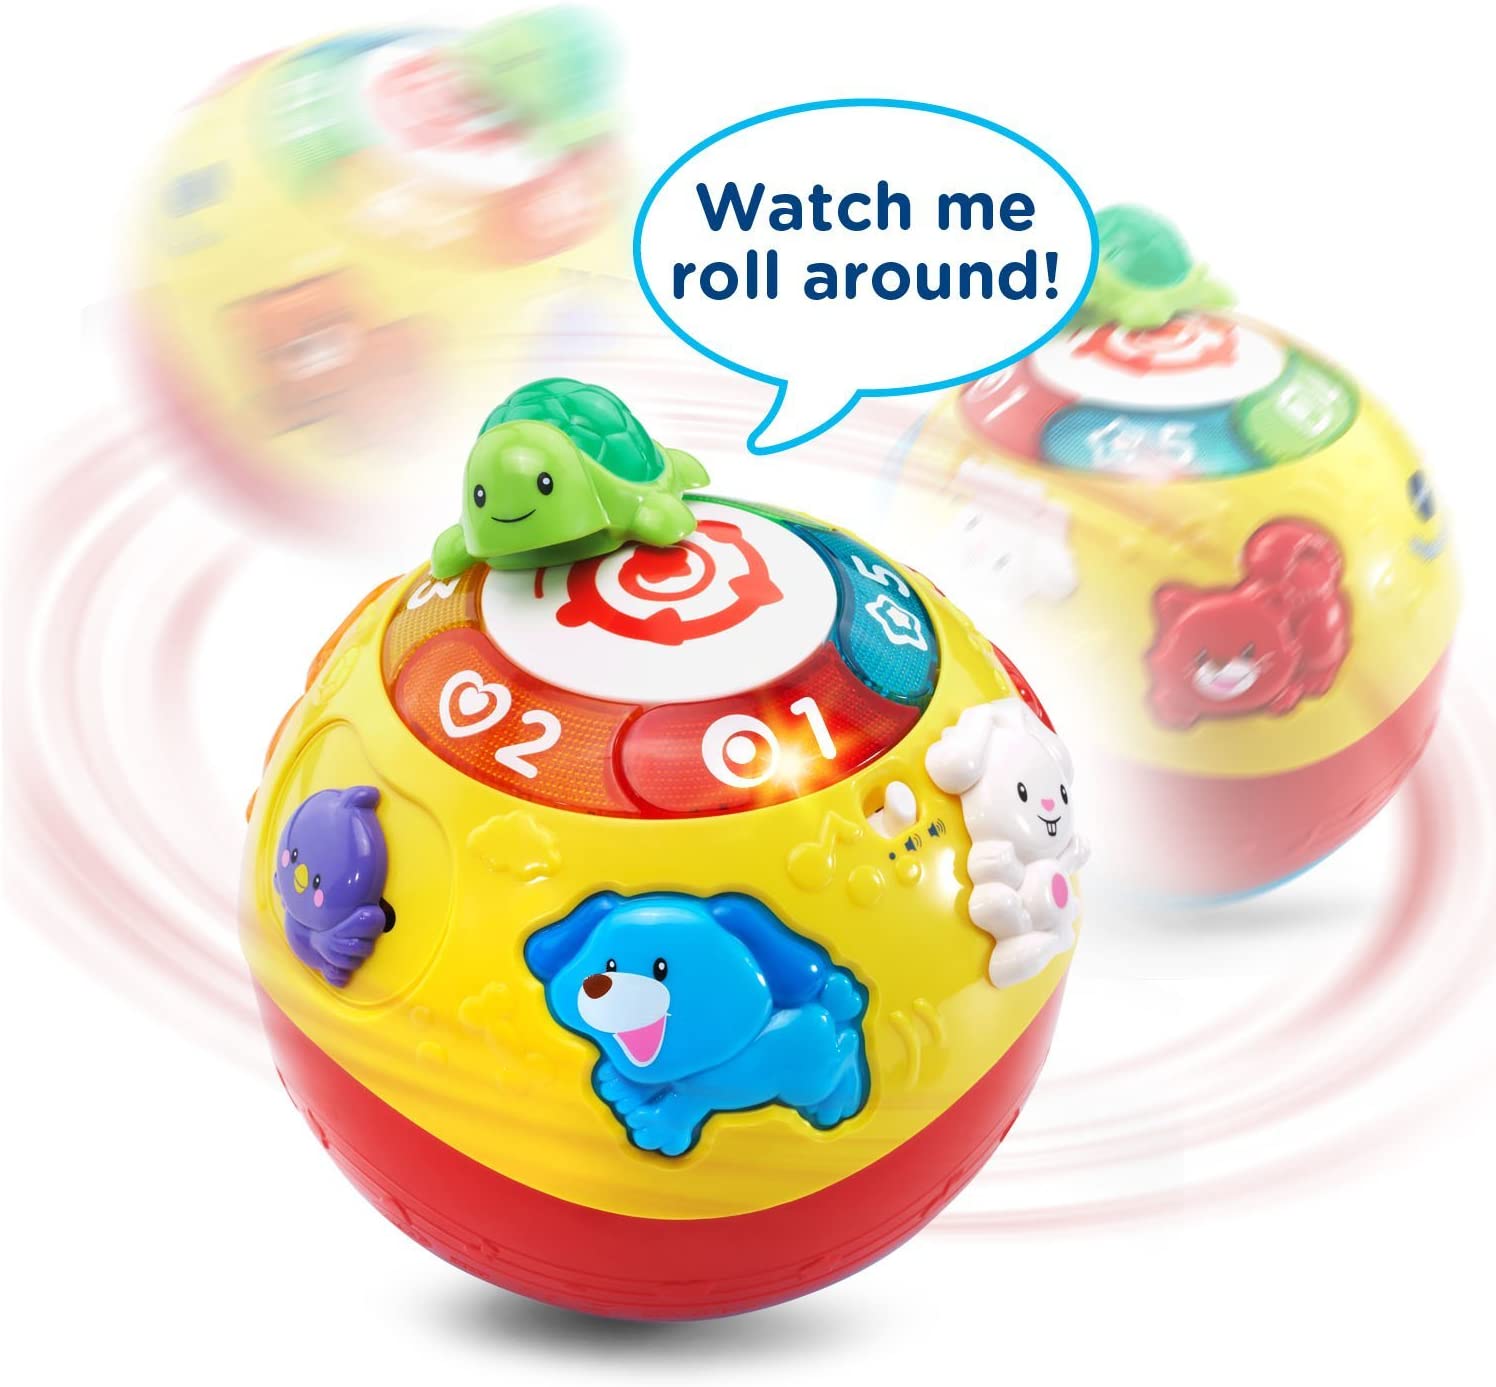 VTech Wiggle and Crawl Ball, Multicolor - with The Animal Friends